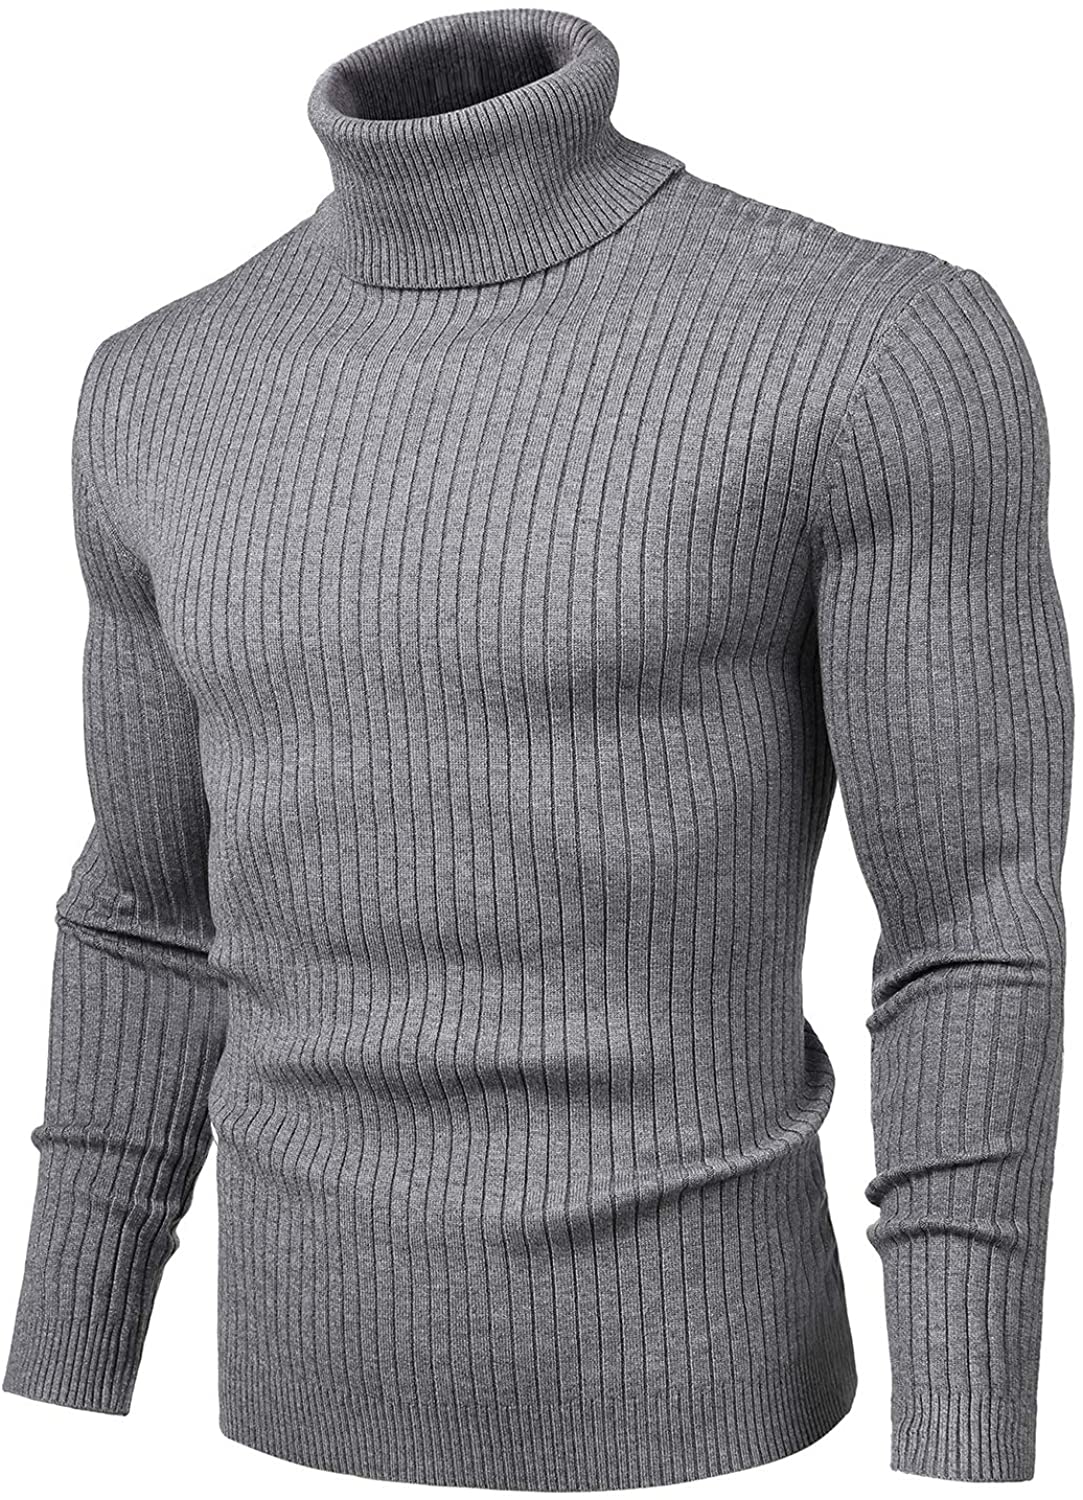 xiaohuoban Mens Fashion Turtleneck Pullover Sweater Knitted Slim Fit Sweater